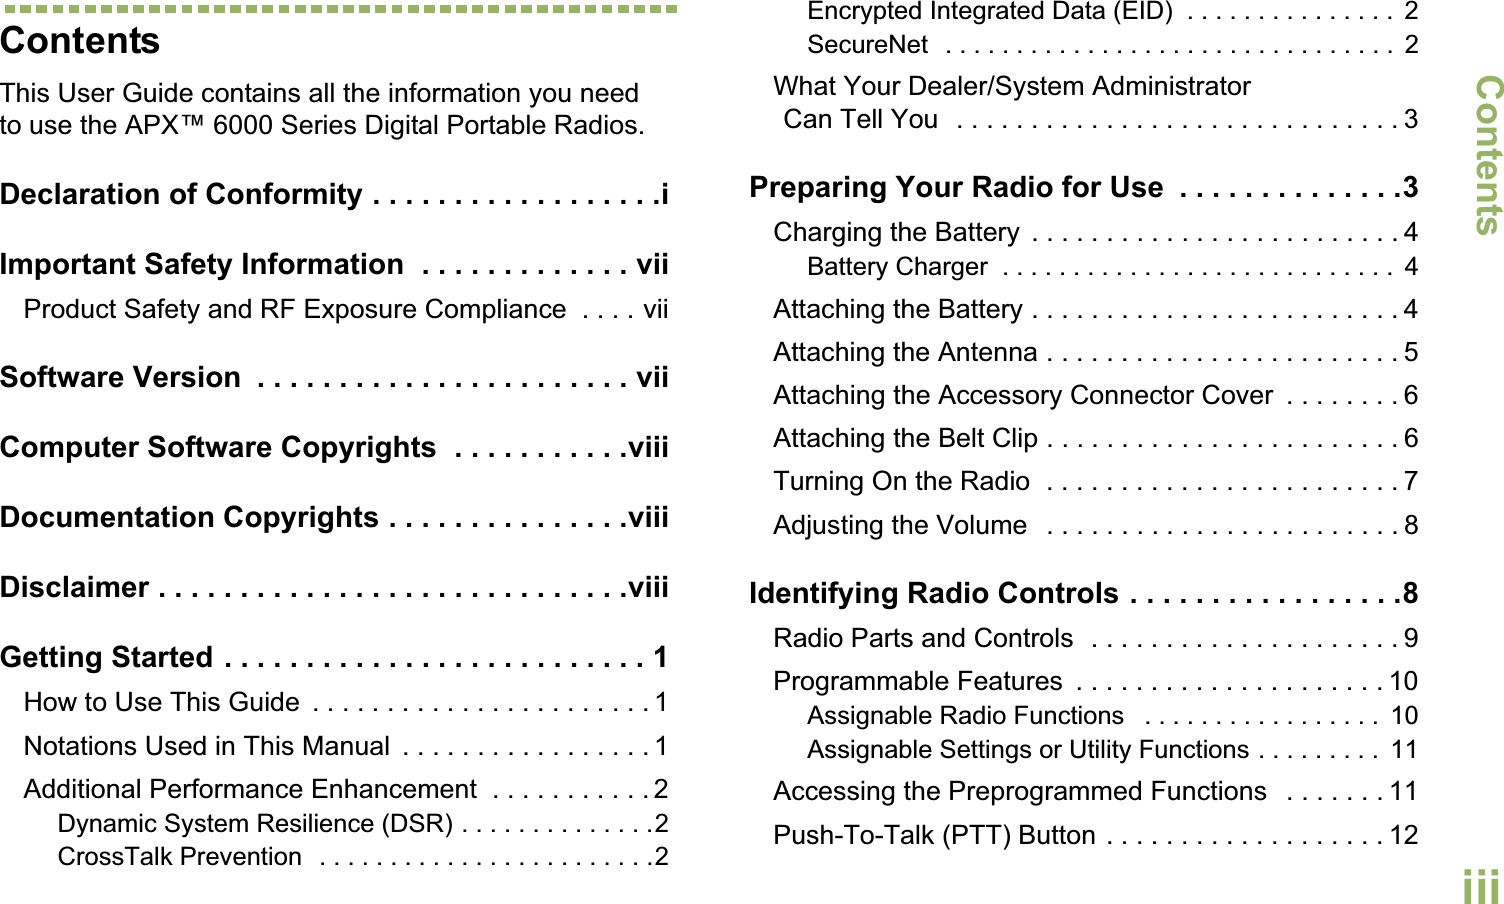 ContentsEnglishiiiContentsThis User Guide contains all the information you need to use the APX™ 6000 Series Digital Portable Radios.Declaration of Conformity . . . . . . . . . . . . . . . . . .iImportant Safety Information  . . . . . . . . . . . . . viiProduct Safety and RF Exposure Compliance  . . . . viiSoftware Version  . . . . . . . . . . . . . . . . . . . . . . . viiComputer Software Copyrights  . . . . . . . . . . .viiiDocumentation Copyrights . . . . . . . . . . . . . . .viiiDisclaimer . . . . . . . . . . . . . . . . . . . . . . . . . . . . .viiiGetting Started . . . . . . . . . . . . . . . . . . . . . . . . . . 1How to Use This Guide  . . . . . . . . . . . . . . . . . . . . . . . 1Notations Used in This Manual  . . . . . . . . . . . . . . . . . 1Additional Performance Enhancement  . . . . . . . . . . . 2Dynamic System Resilience (DSR) . . . . . . . . . . . . . .2CrossTalk Prevention  . . . . . . . . . . . . . . . . . . . . . . . .2Encrypted Integrated Data (EID)  . . . . . . . . . . . . . . .  2SecureNet  . . . . . . . . . . . . . . . . . . . . . . . . . . . . . . . .  2What Your Dealer/System AdministratorCan Tell You  . . . . . . . . . . . . . . . . . . . . . . . . . . . . . . 3Preparing Your Radio for Use  . . . . . . . . . . . . . .3Charging the Battery  . . . . . . . . . . . . . . . . . . . . . . . . . 4Battery Charger  . . . . . . . . . . . . . . . . . . . . . . . . . . . .  4Attaching the Battery . . . . . . . . . . . . . . . . . . . . . . . . . 4Attaching the Antenna . . . . . . . . . . . . . . . . . . . . . . . . 5Attaching the Accessory Connector Cover  . . . . . . . . 6Attaching the Belt Clip . . . . . . . . . . . . . . . . . . . . . . . . 6Turning On the Radio  . . . . . . . . . . . . . . . . . . . . . . . . 7Adjusting the Volume   . . . . . . . . . . . . . . . . . . . . . . . . 8Identifying Radio Controls . . . . . . . . . . . . . . . . .8Radio Parts and Controls  . . . . . . . . . . . . . . . . . . . . . 9Programmable Features  . . . . . . . . . . . . . . . . . . . . . 10Assignable Radio Functions   . . . . . . . . . . . . . . . . .  10Assignable Settings or Utility Functions . . . . . . . . .  11Accessing the Preprogrammed Functions   . . . . . . . 11Push-To-Talk (PTT) Button . . . . . . . . . . . . . . . . . . . 12